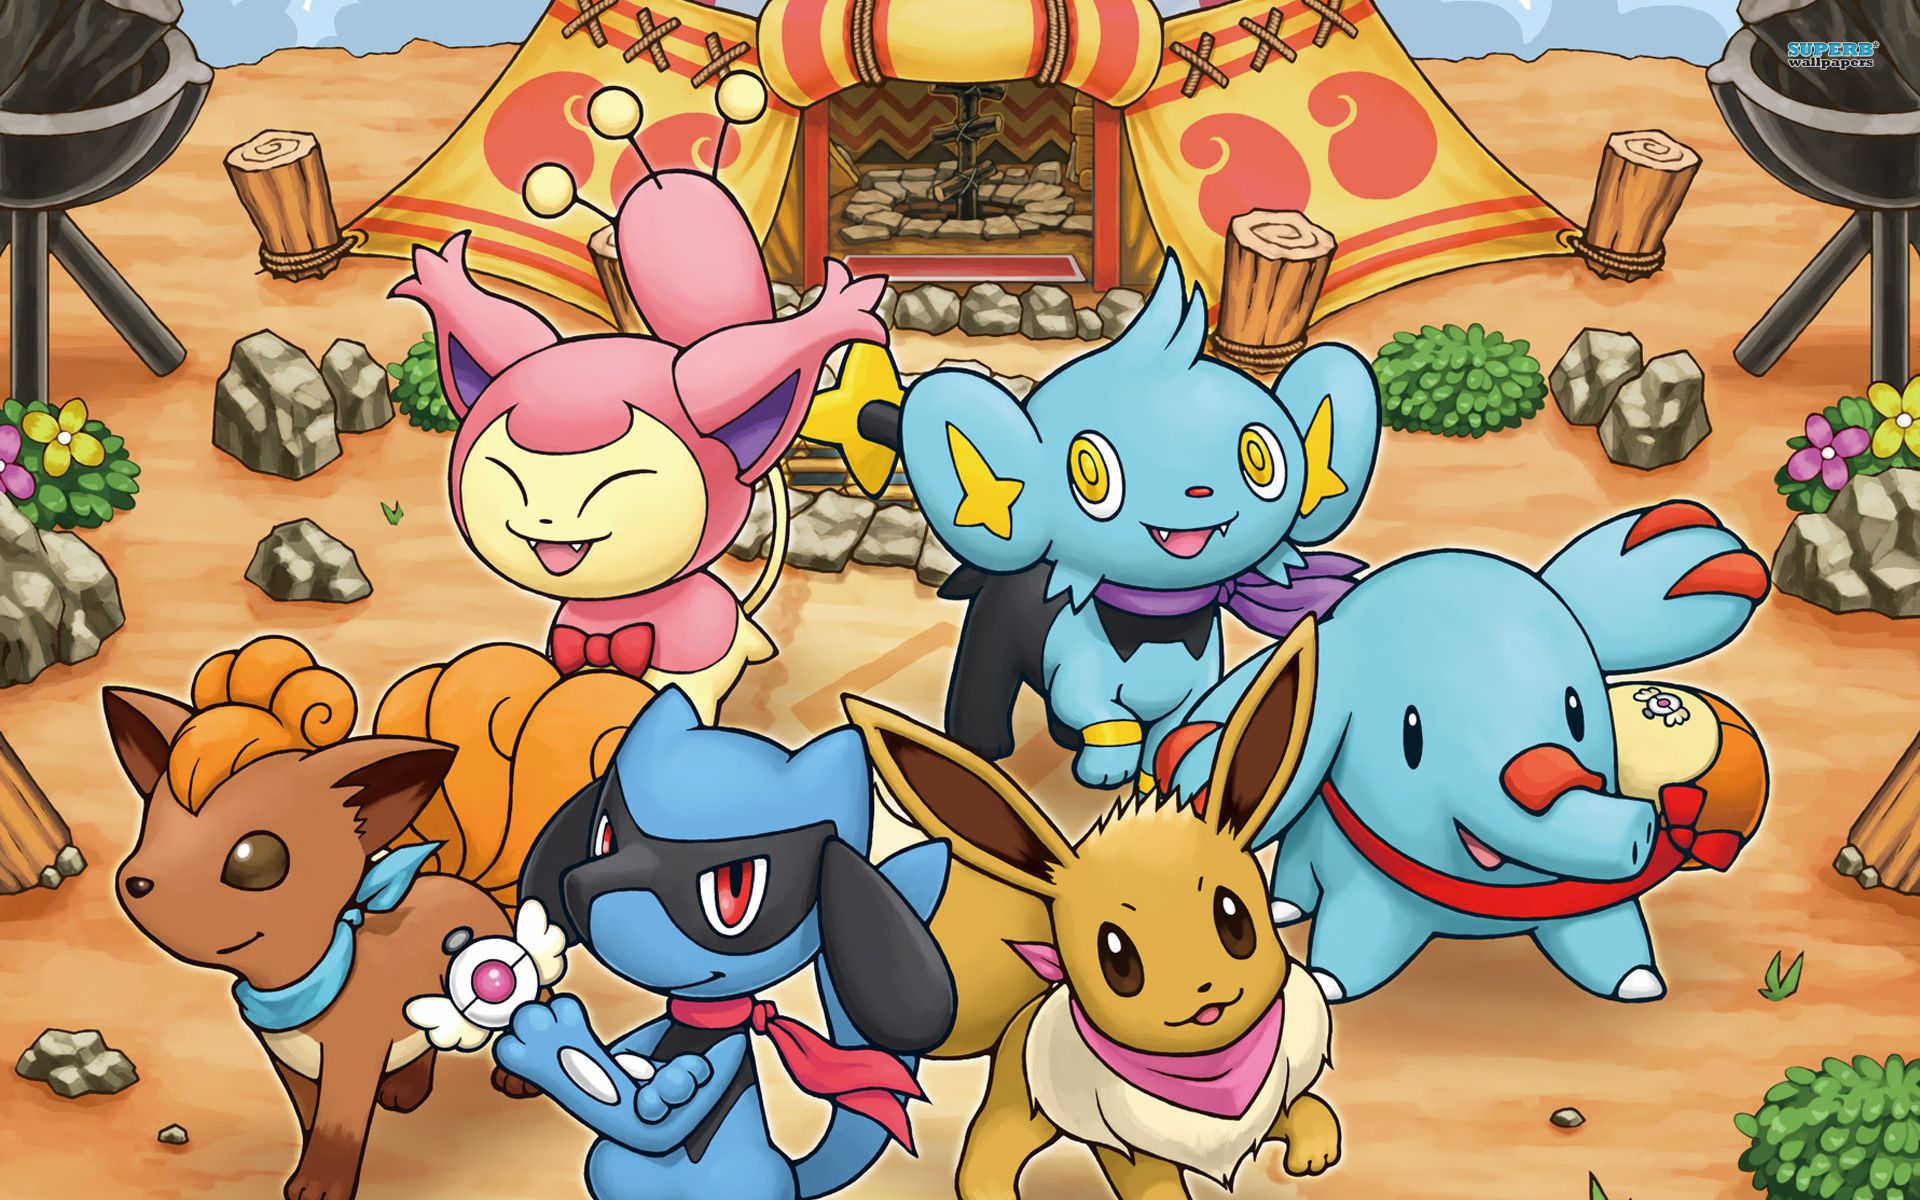 pokemon super mystery dungeon decrypted rom download